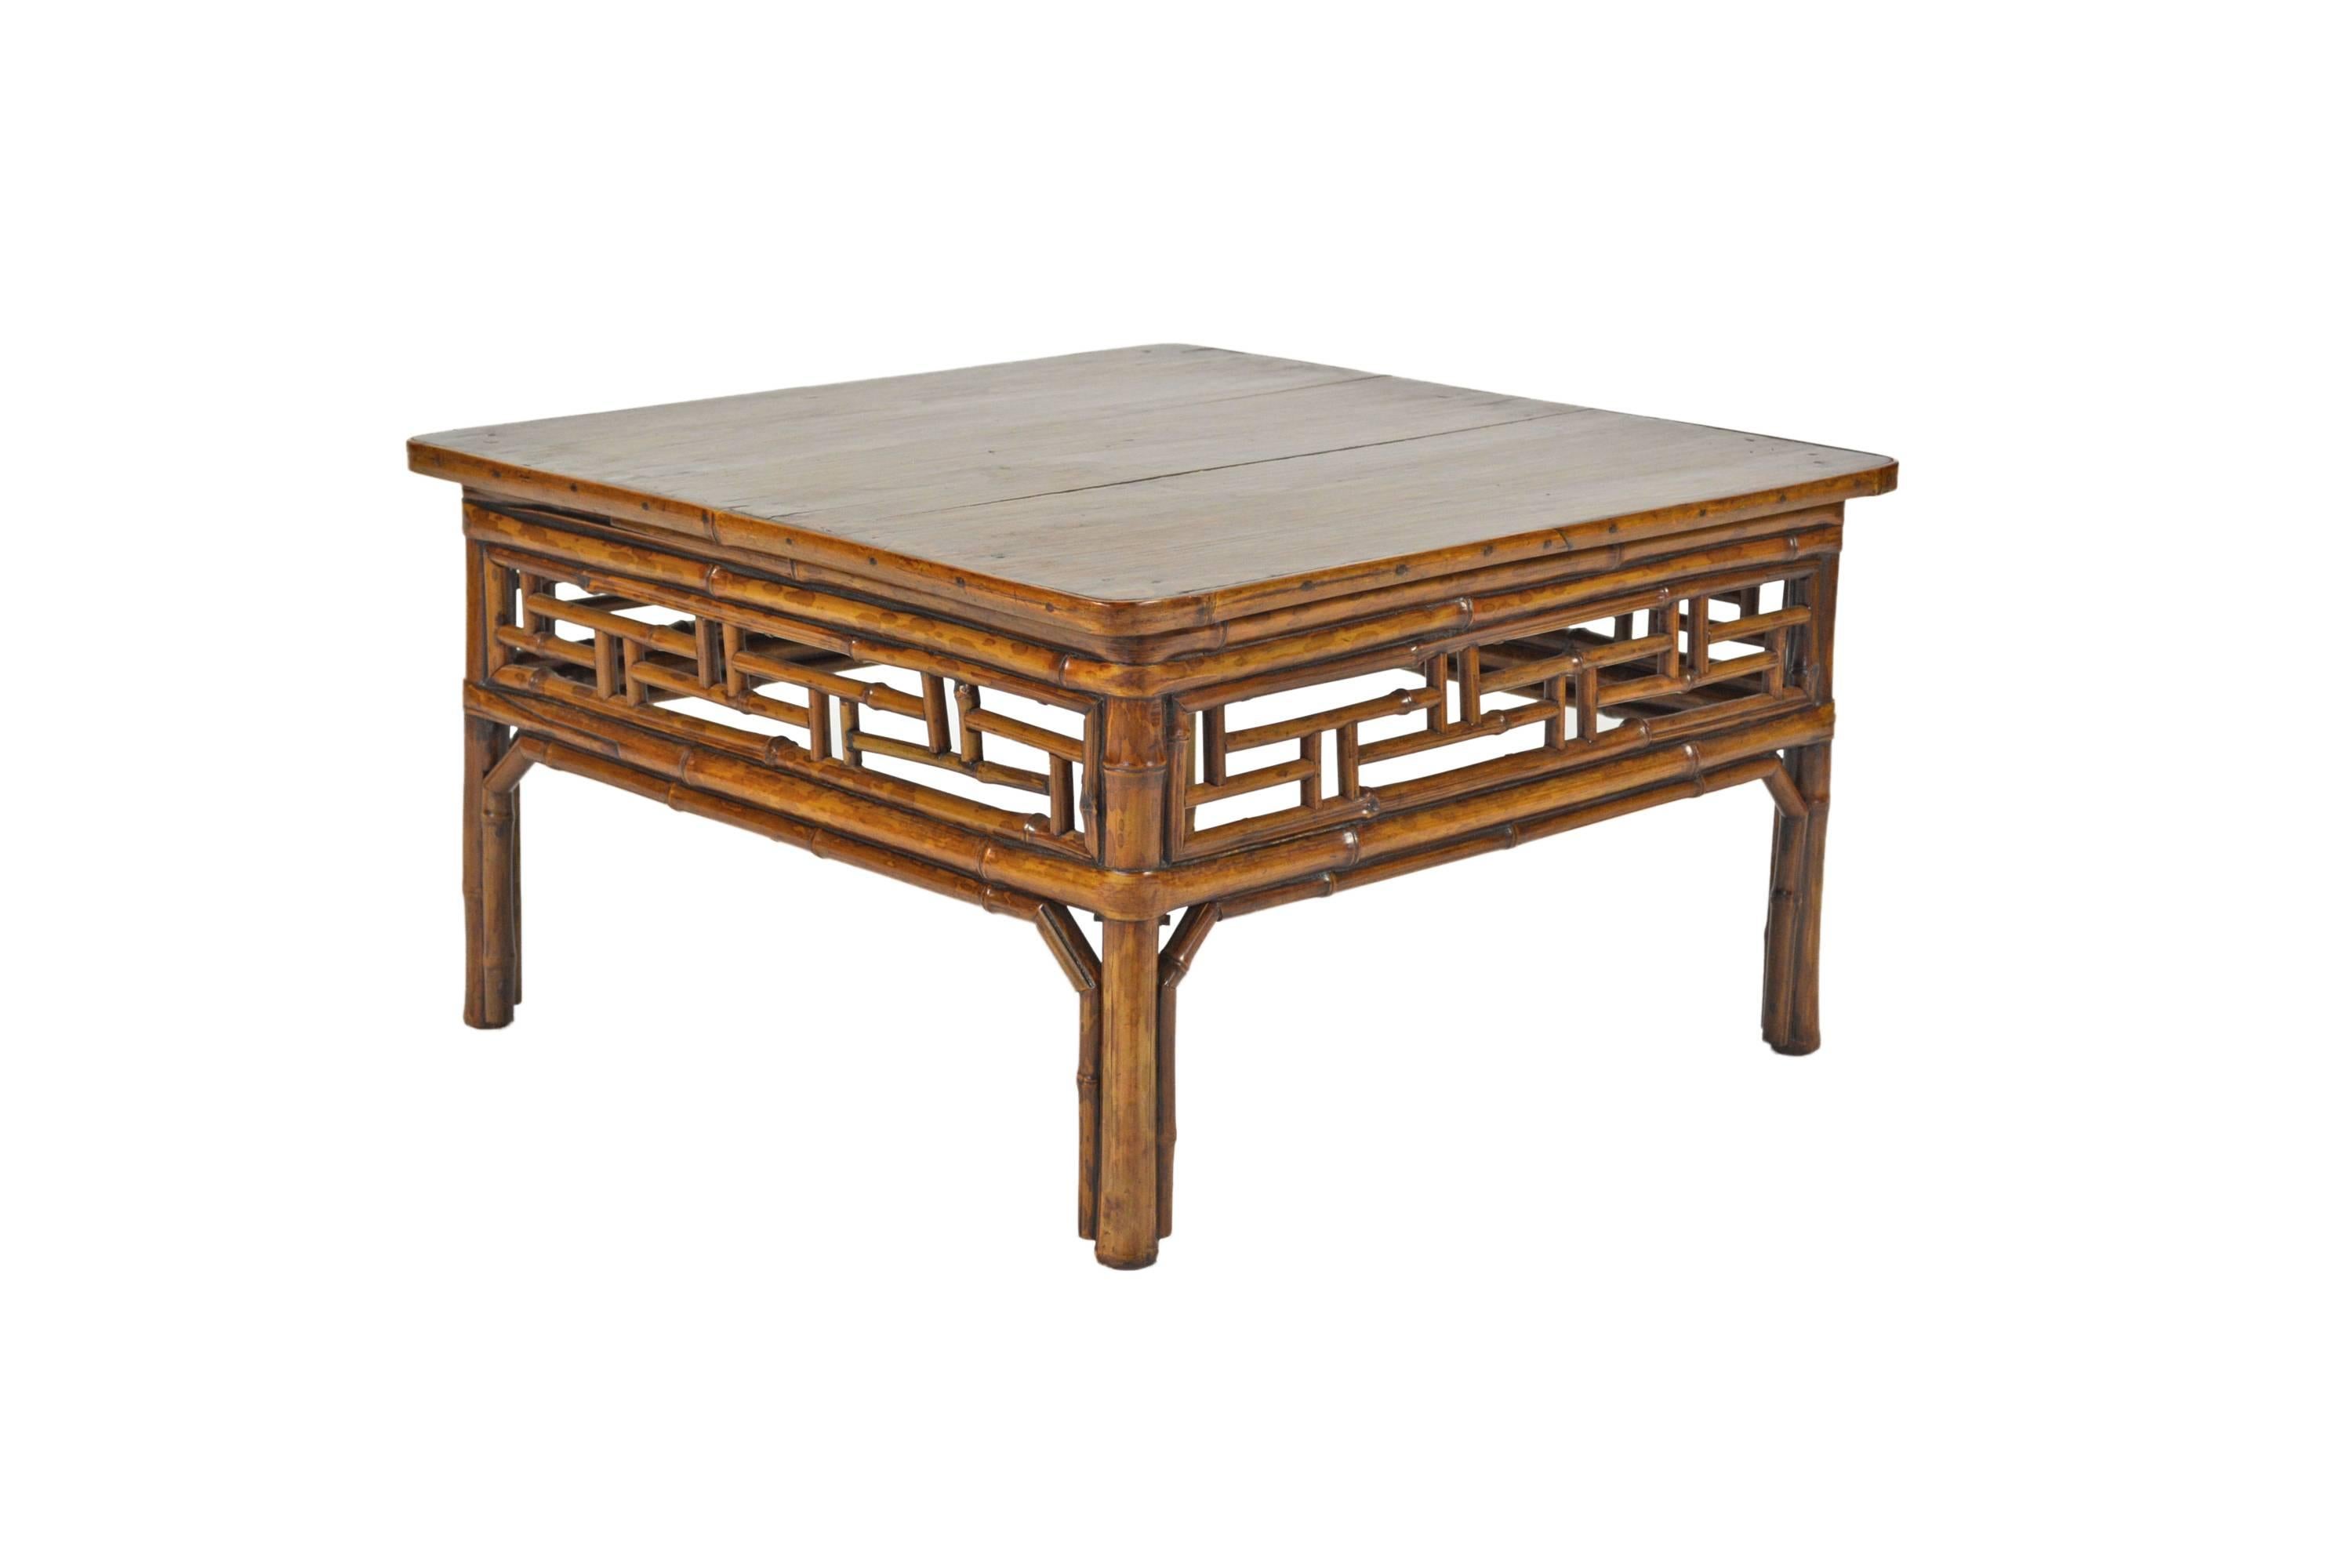 This late 19th century low square table from Southern China is built from spotted bamboo. It is brilliantly constructed with a geometric fretwork apron and legs held in place with double wraparound stretchers. Creating furniture from bamboo was a